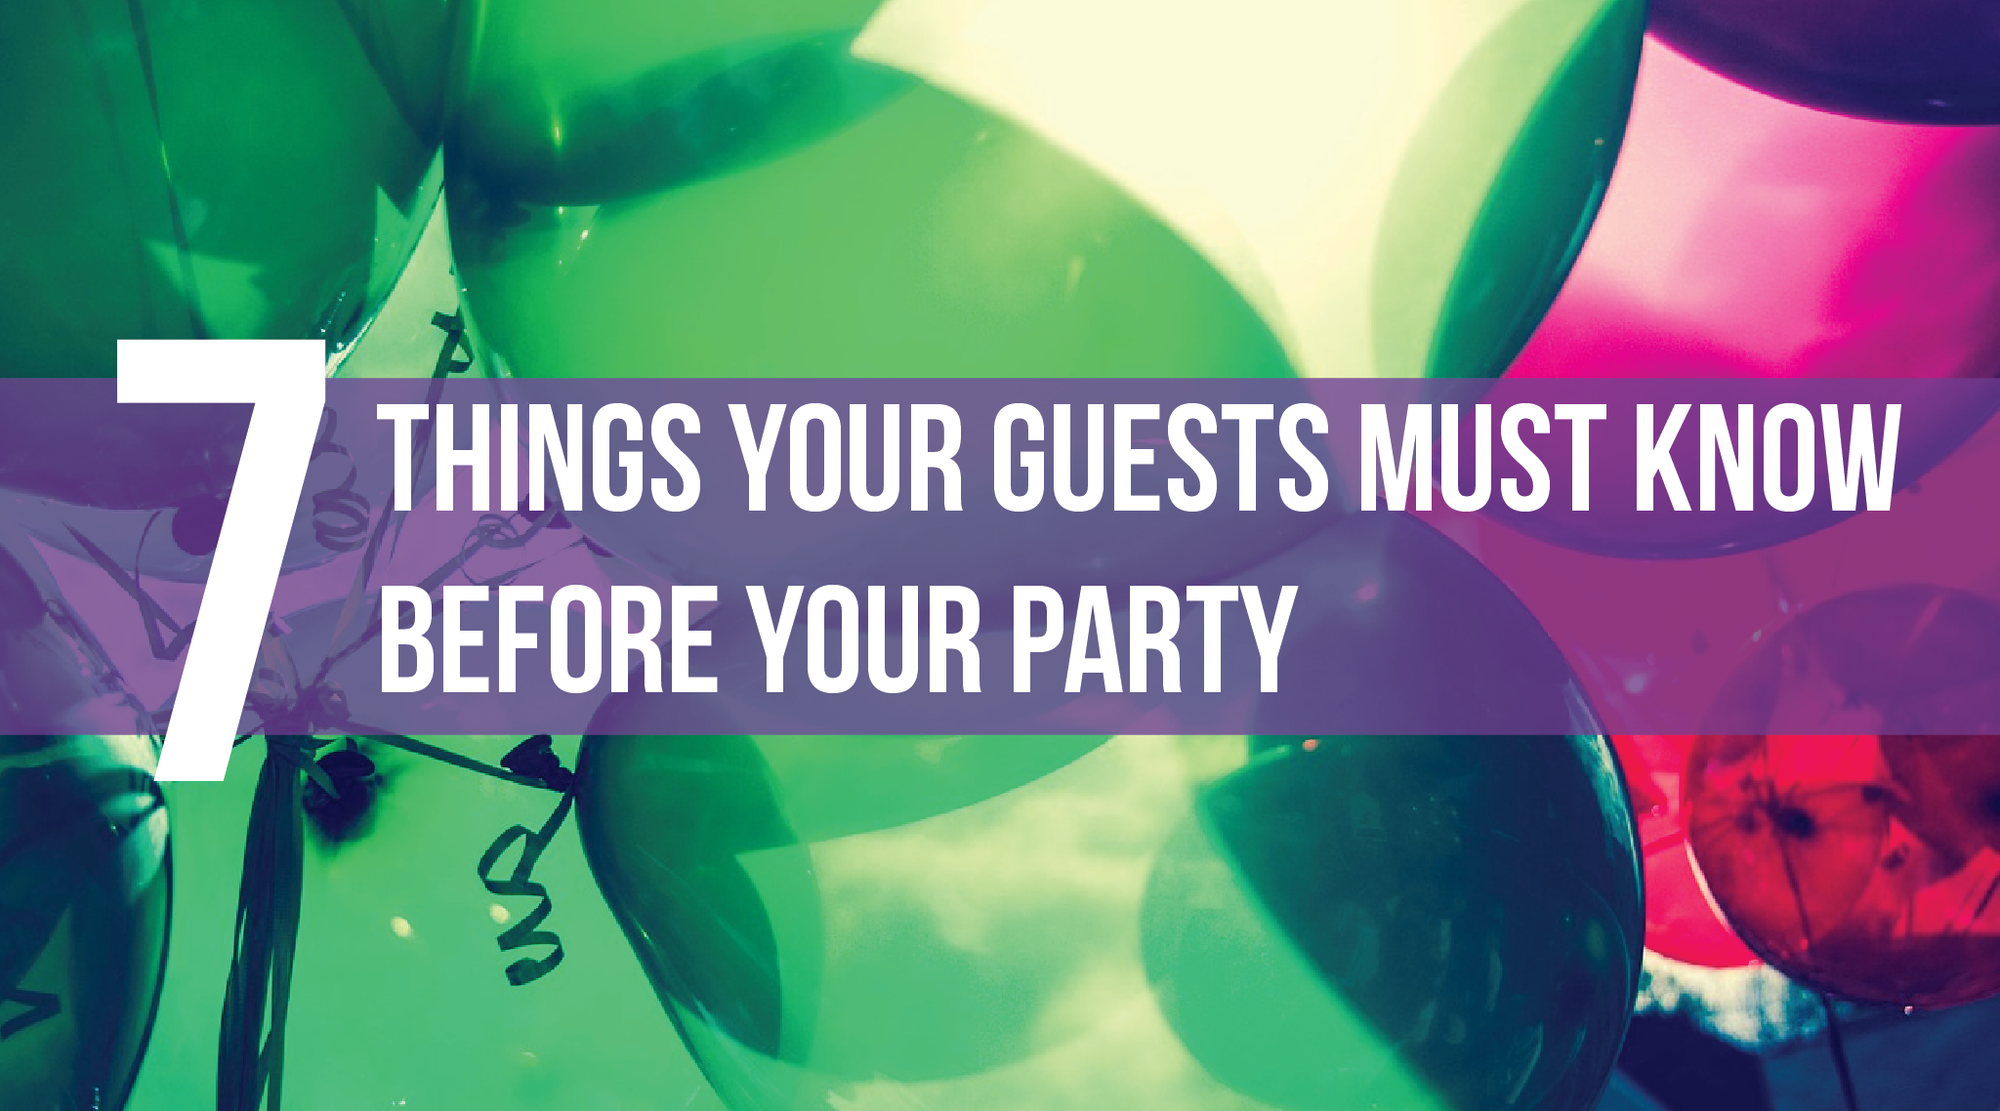 7 Things Your Guests Must Know Before Your Party